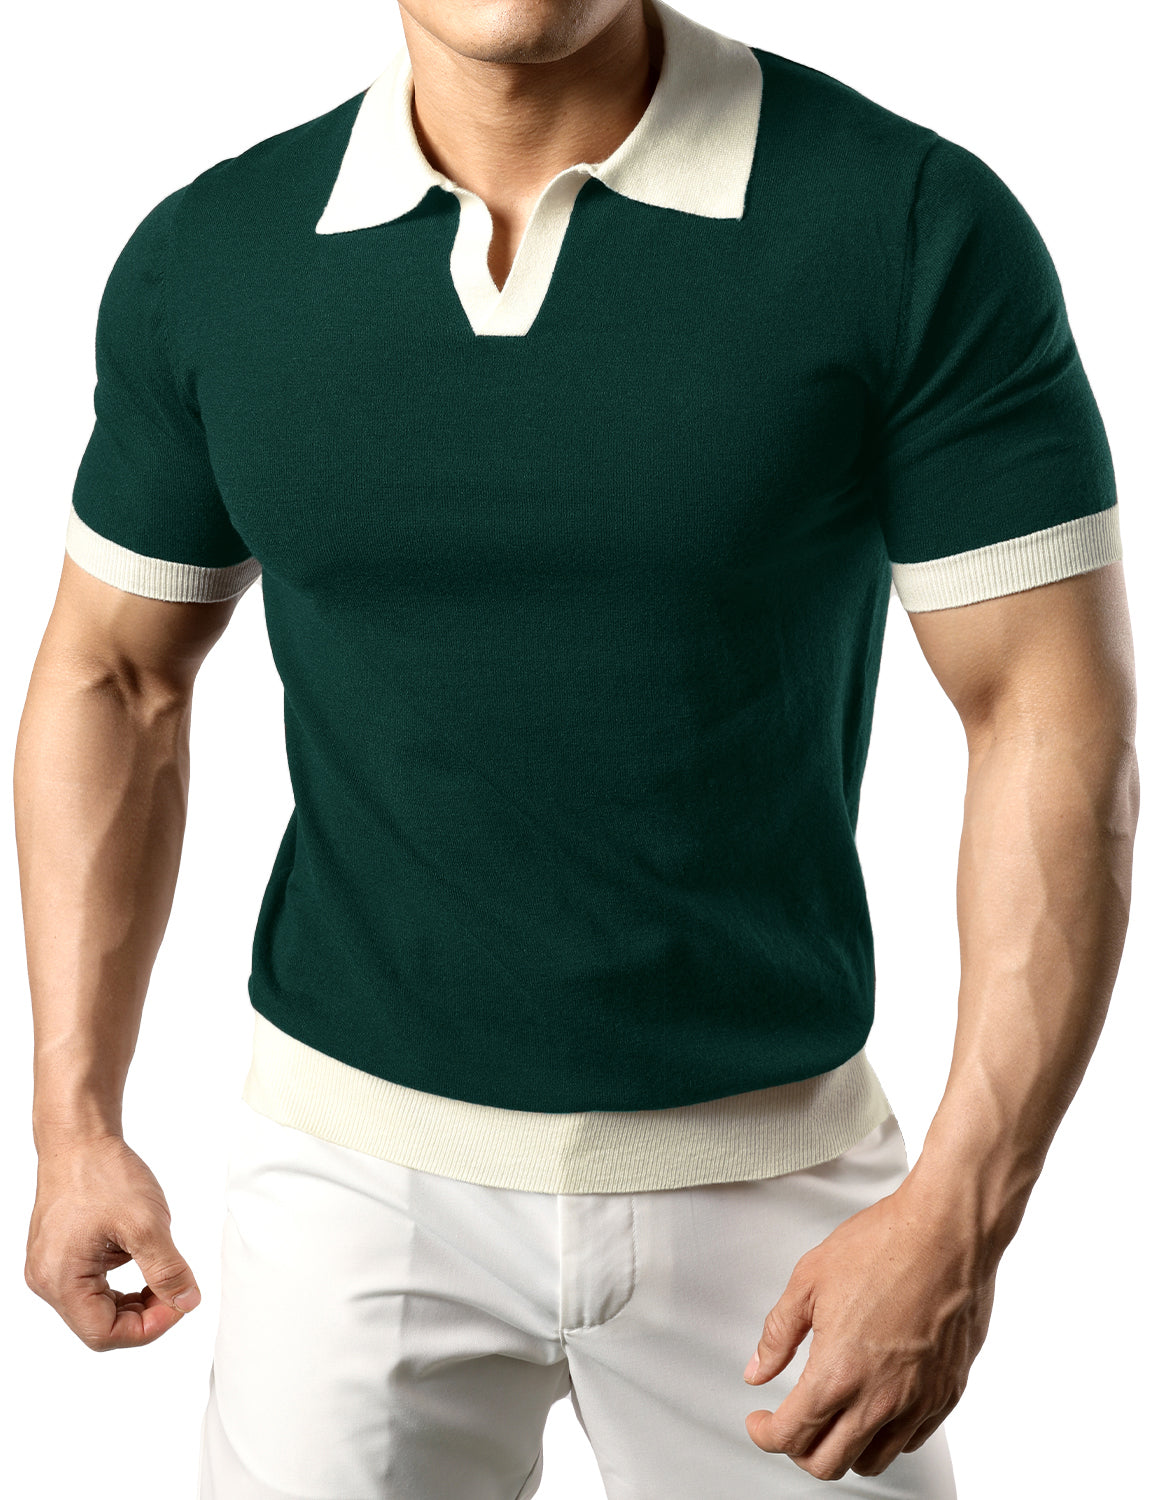 JOGAL Men's Muscle Slim Fit V Neck Knit Polo Shirts Short Sleeve Casual Pullover Golf Shirts